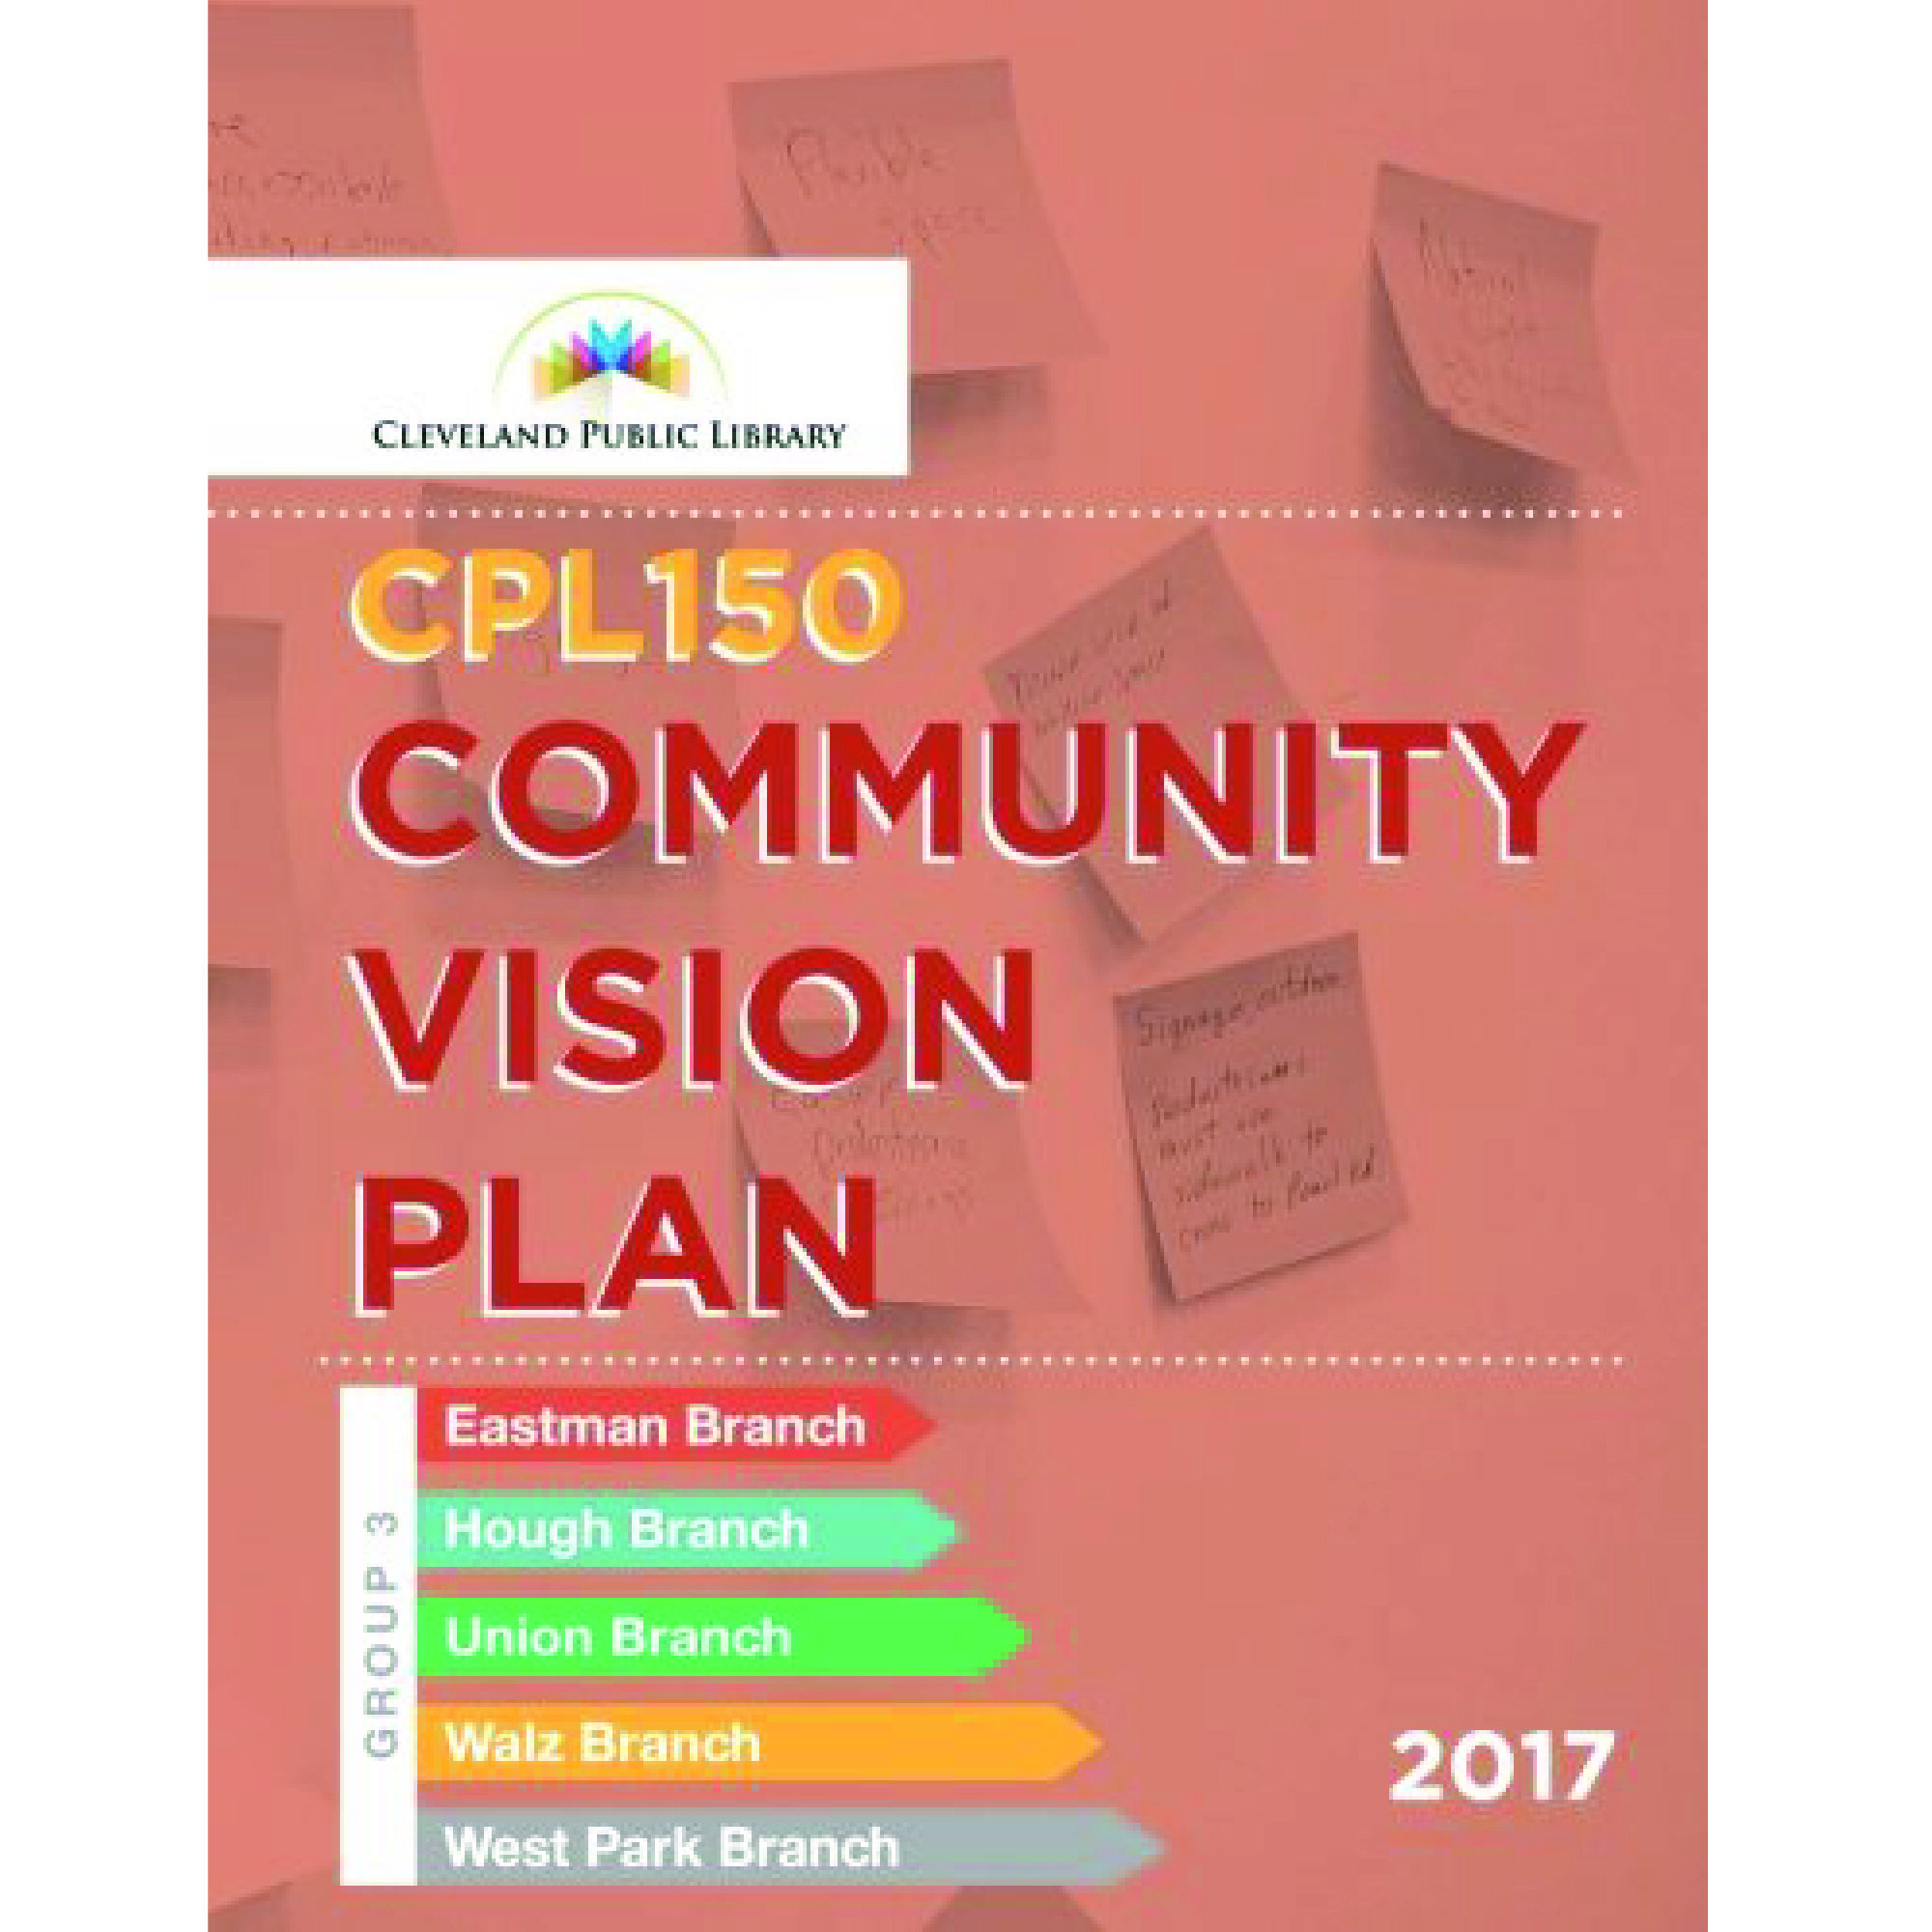 CPL150 Community Vision Plan: Group 3